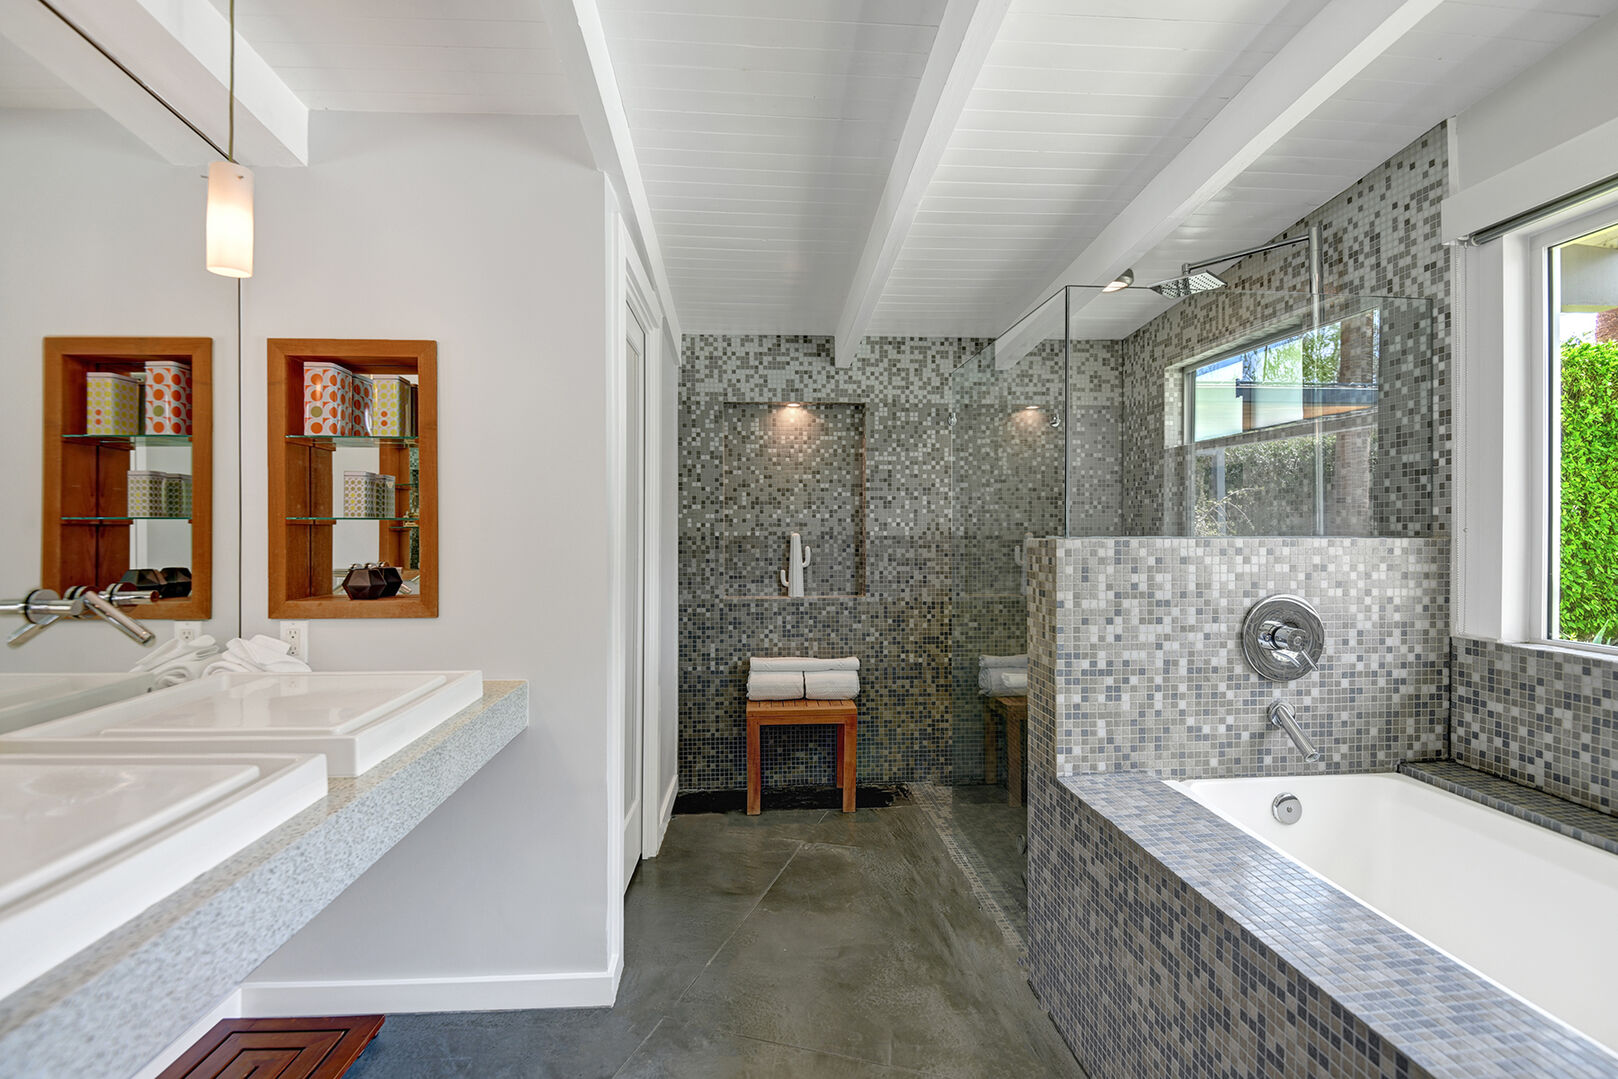 MASTER BATH WITH WALK-IN SHOWER, SPA LIKE SOAKING TUB AND DUAL SINKS